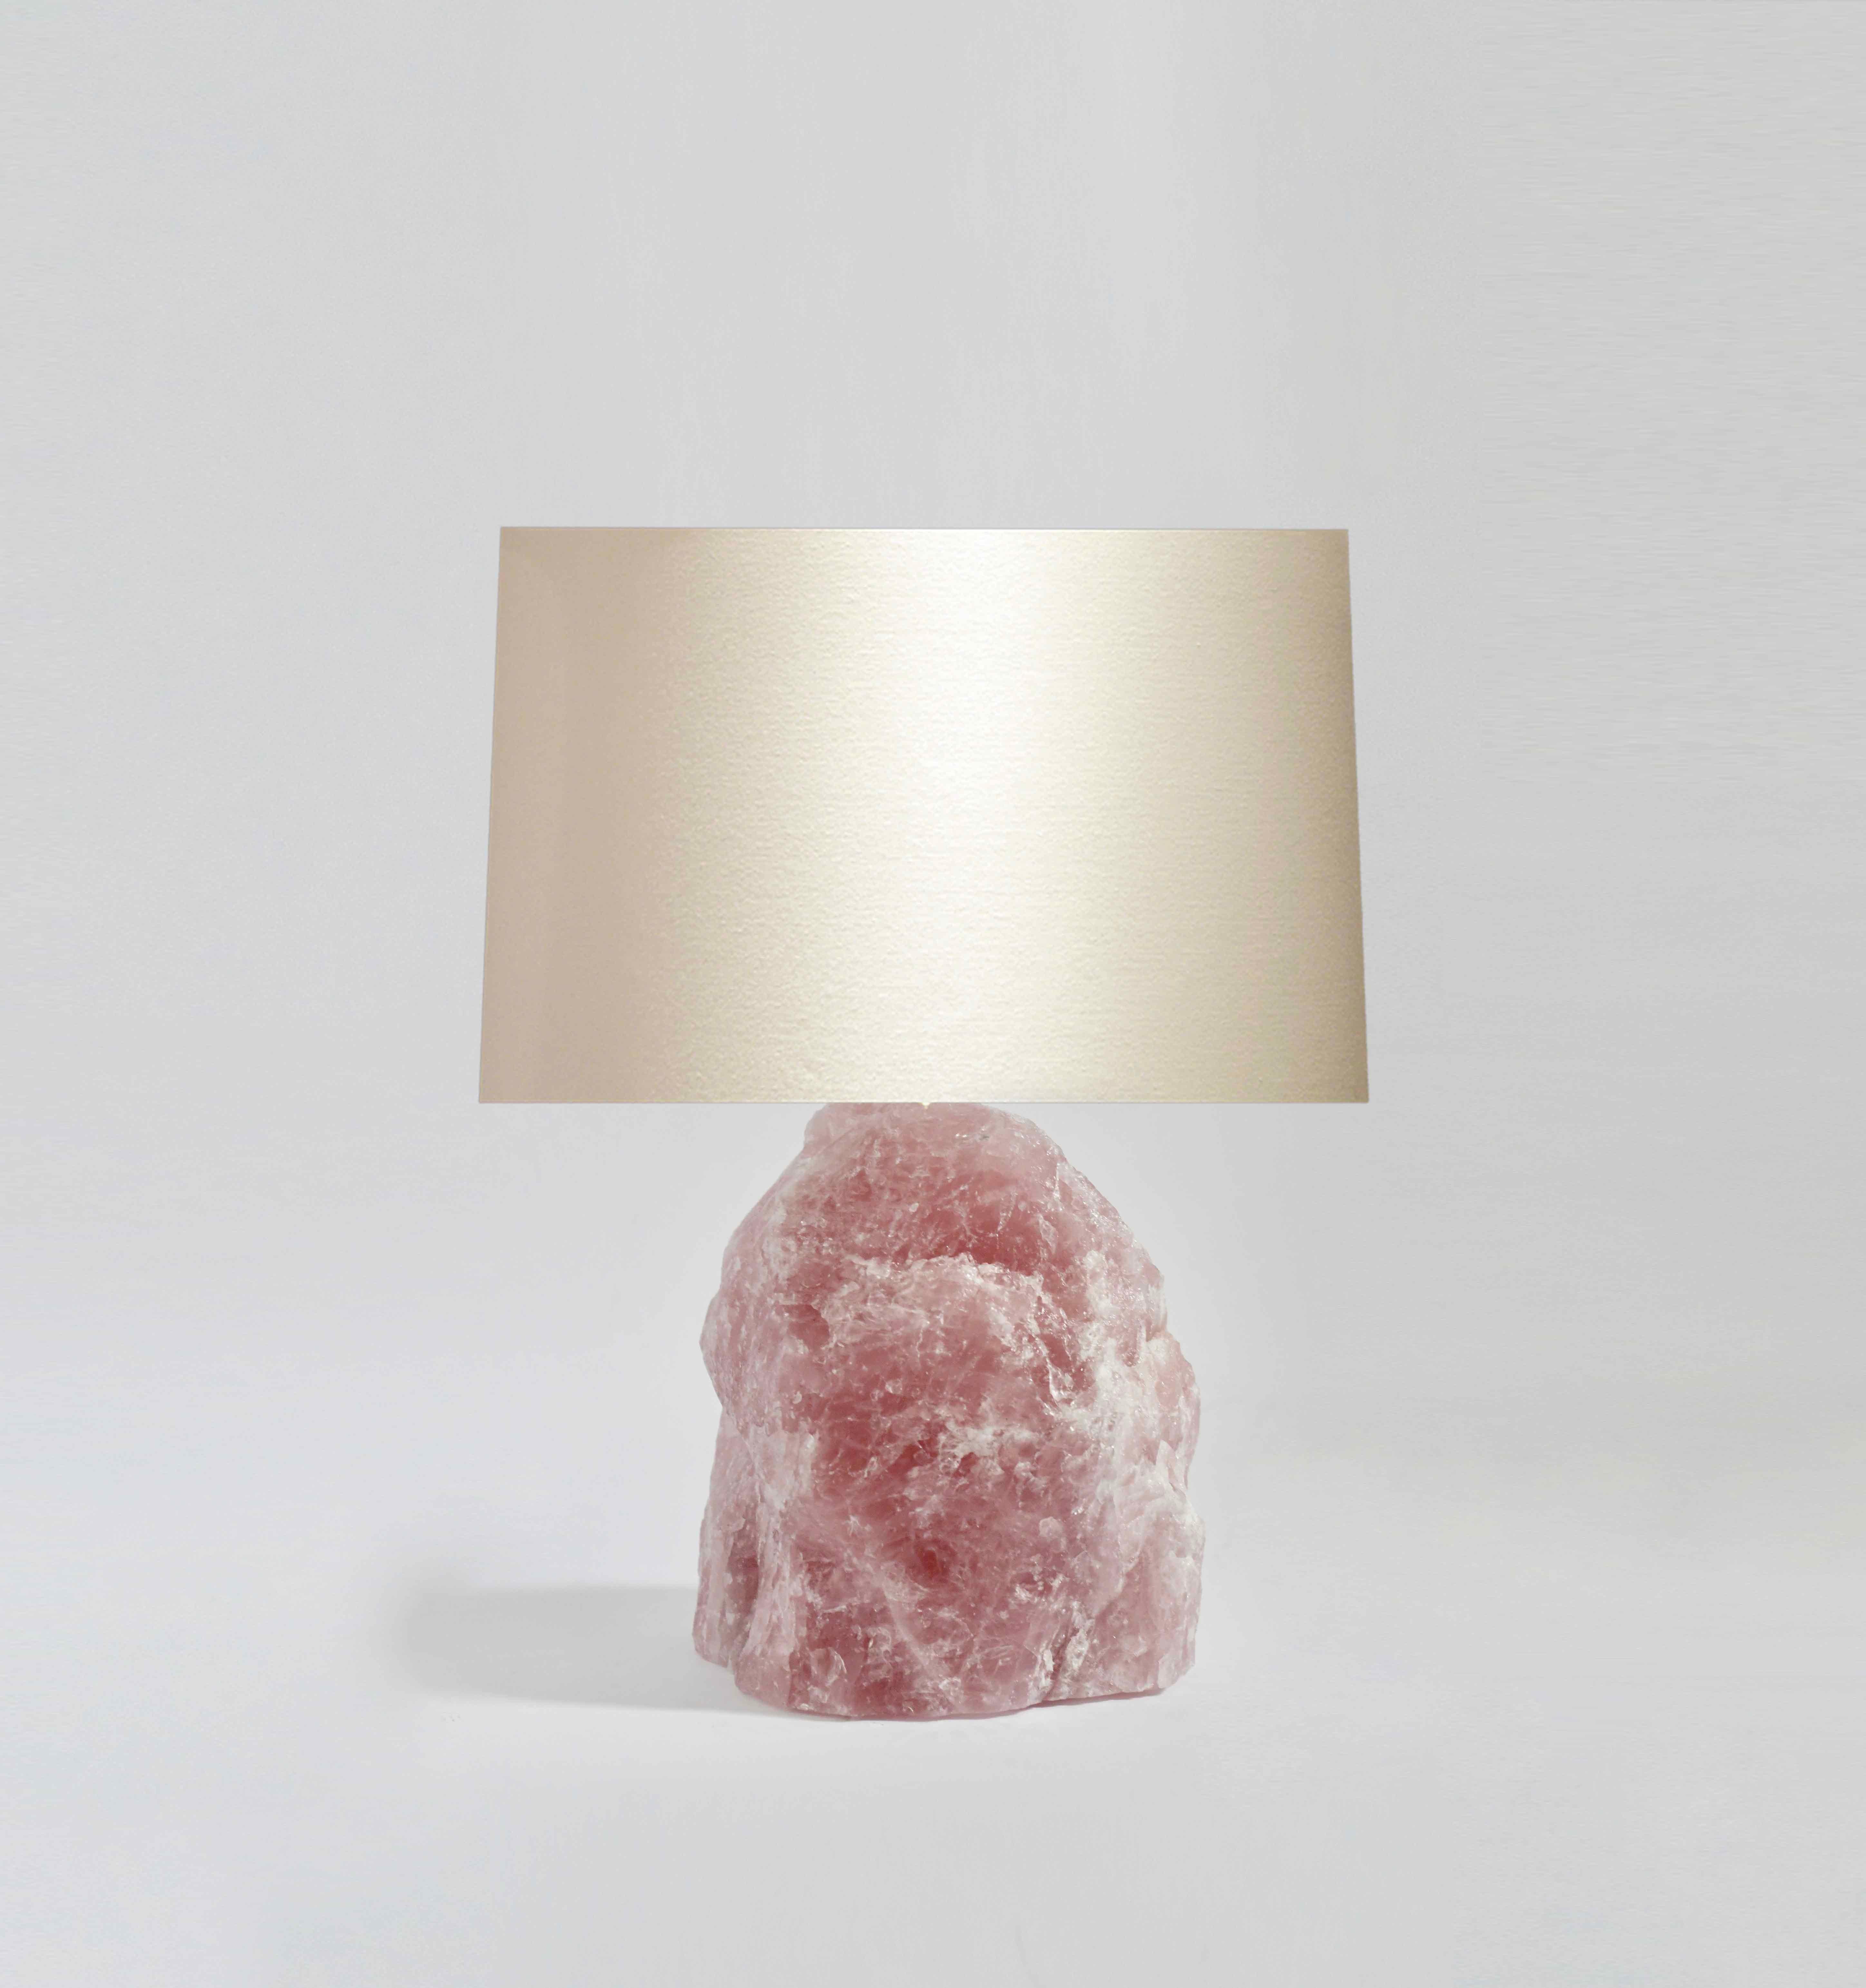 Natural rose quartz mounted as a lamp. Created by Phoenix Gallery, NYC.
Lampshade do not include.
To the top of quartz: 11.5